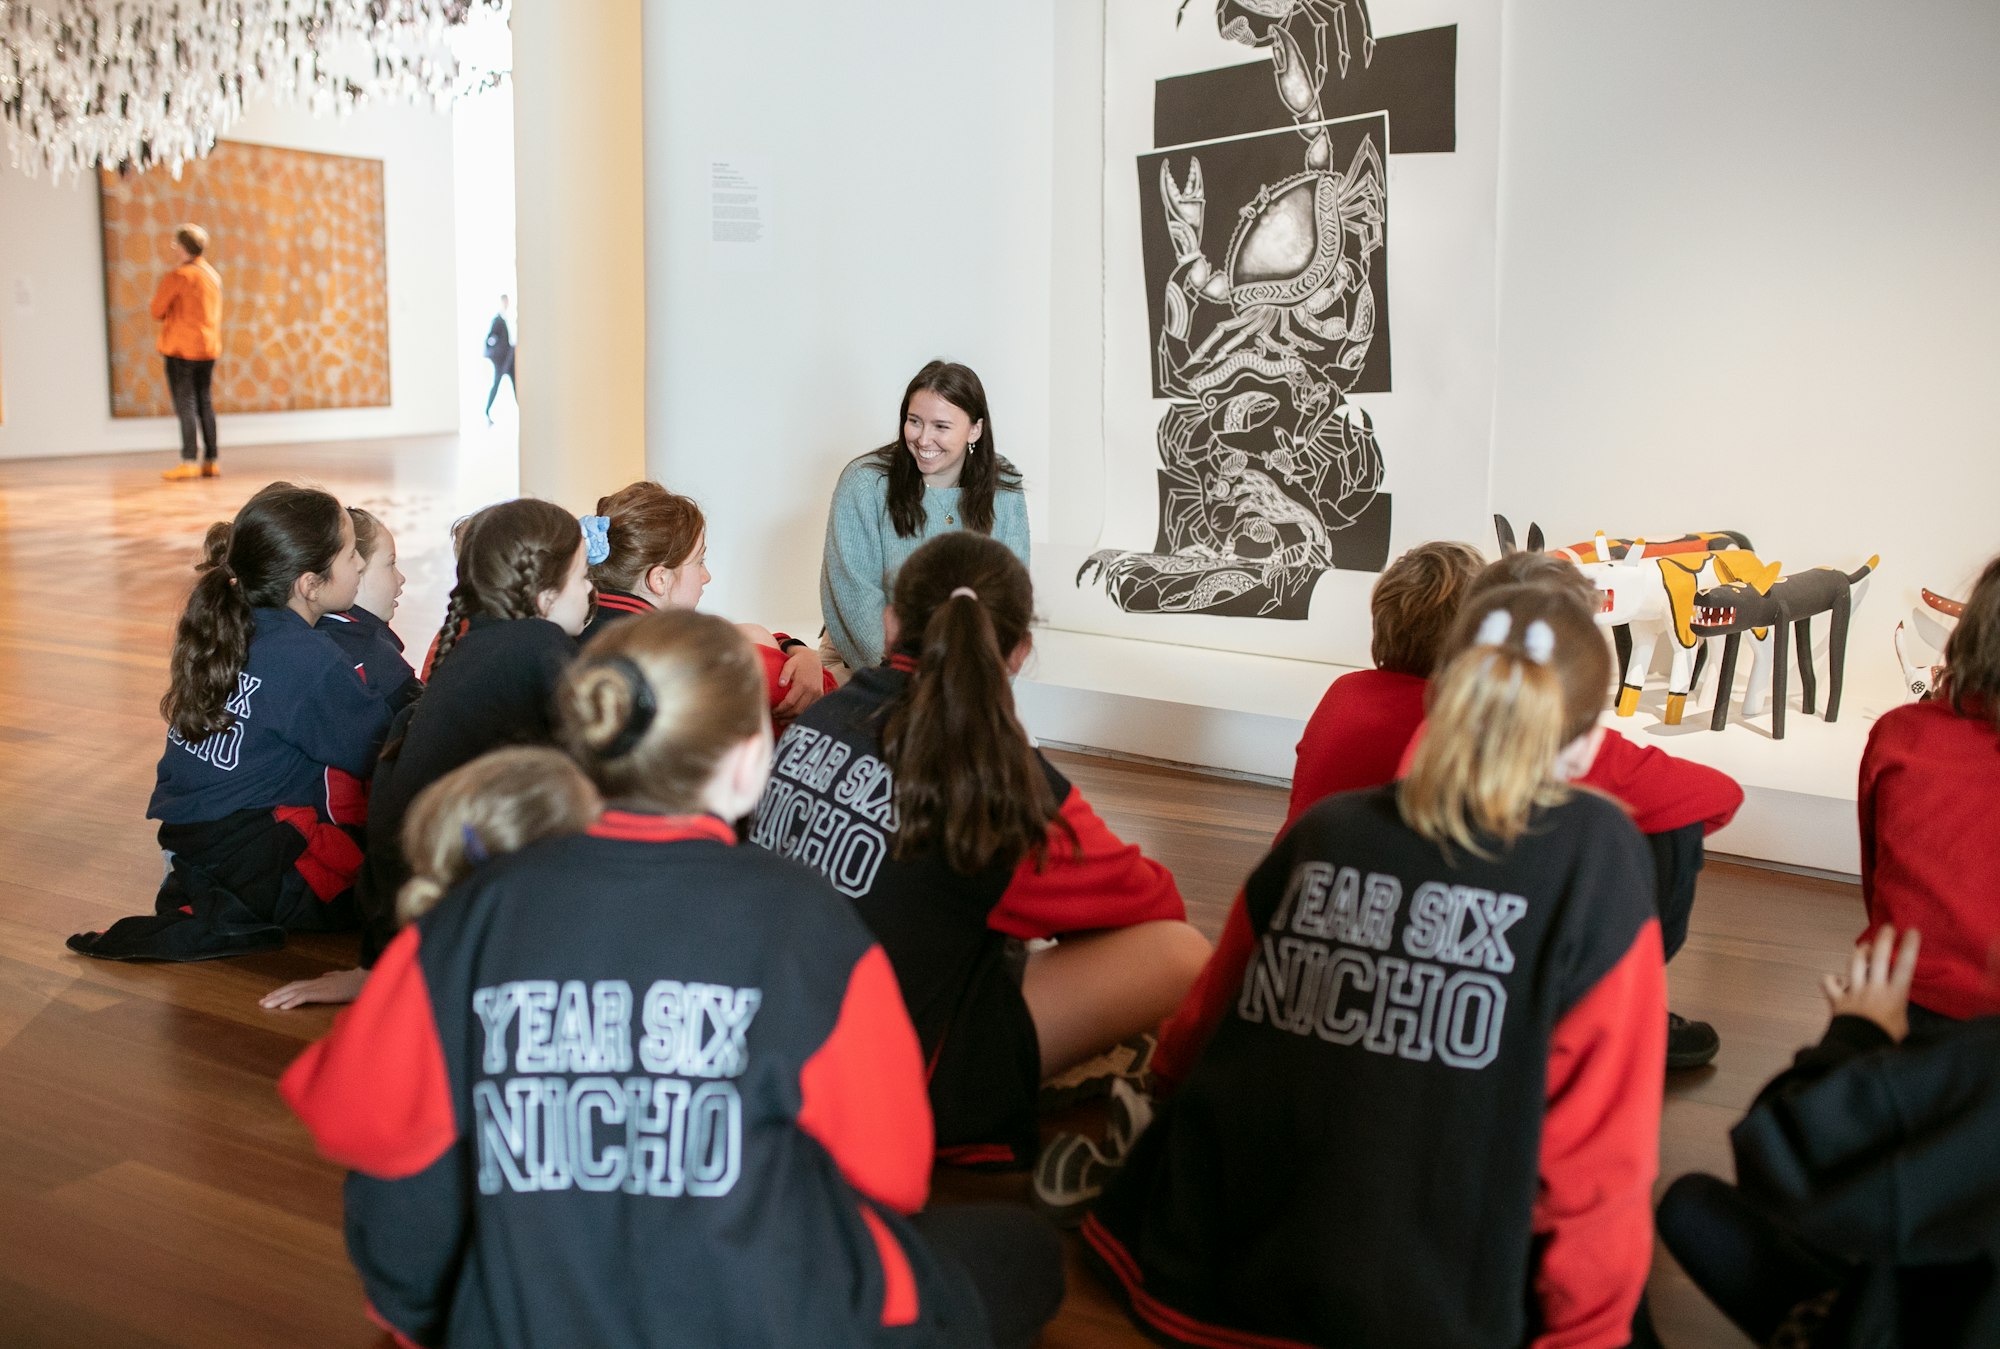 Art Gallery educator speaking with students at the Art Gallery of New South Wales.